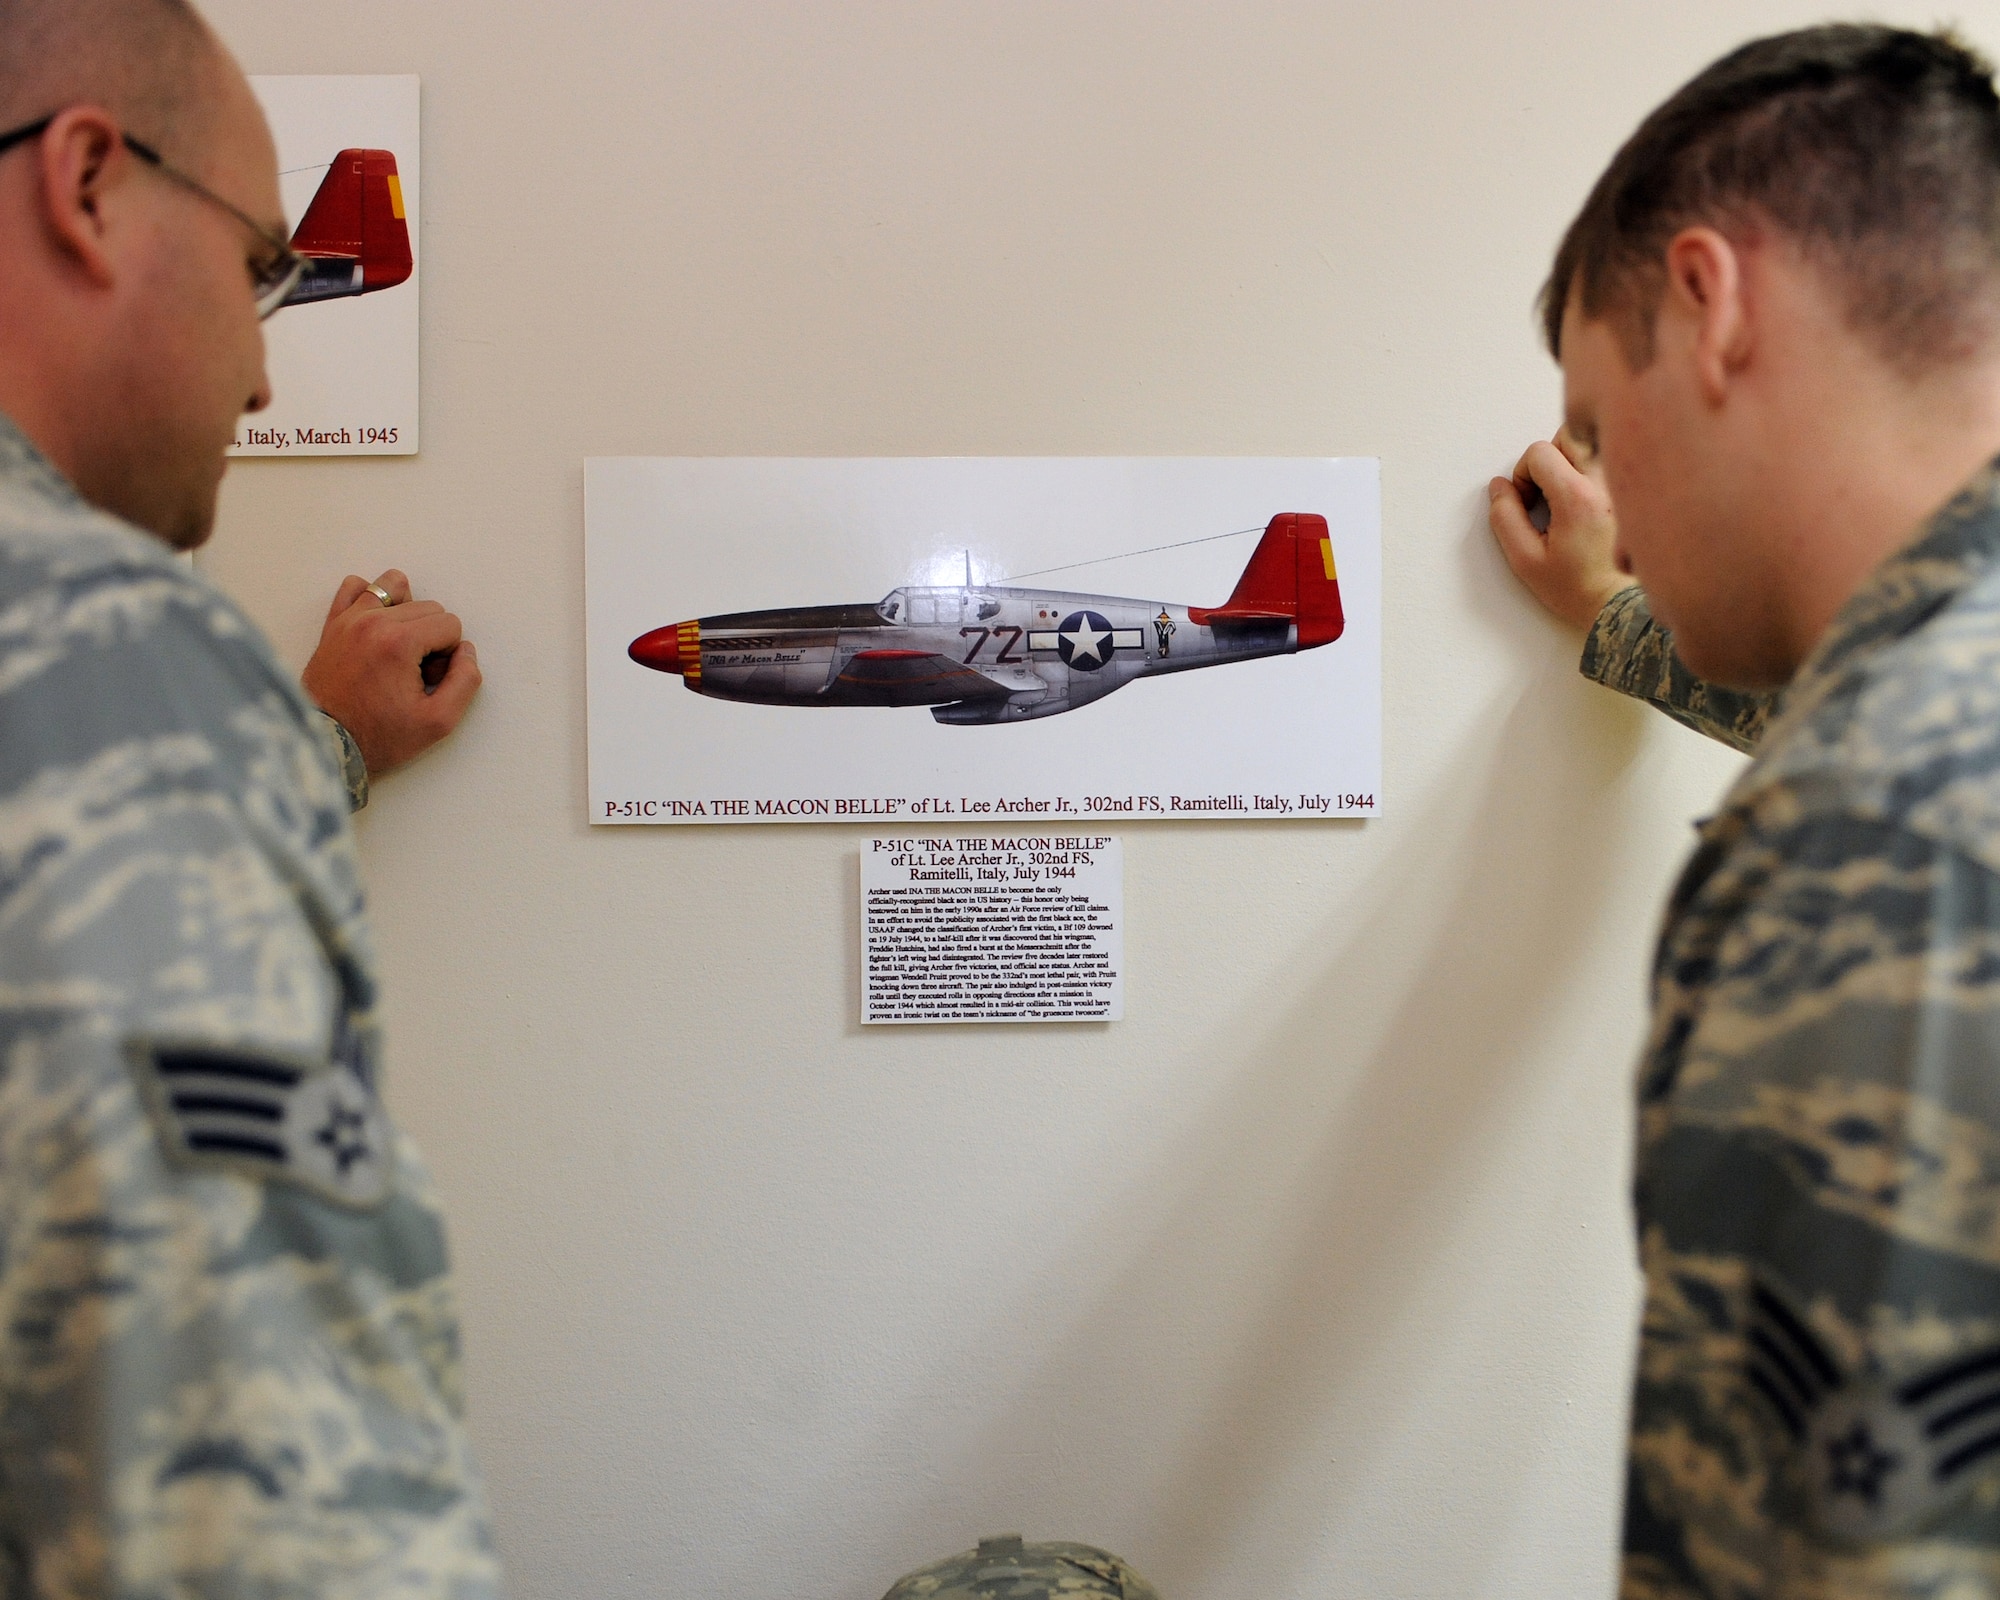 Two current members of the 332nd Air Expeditionary Wing reflect on the achievements of retired Lt. Col. Lee A. Archer at a display honoring his legacy in the wing headquarters building at Joint Base Balad, Iraq, Jan. 30. Colonel Archer, one of the unit’s original Tuskegee Airmen, passed away Jan. 27 in New York at the age of 90. (U.S. Air Force photo by Tech. Sgt. Linda C. Miller/Released)